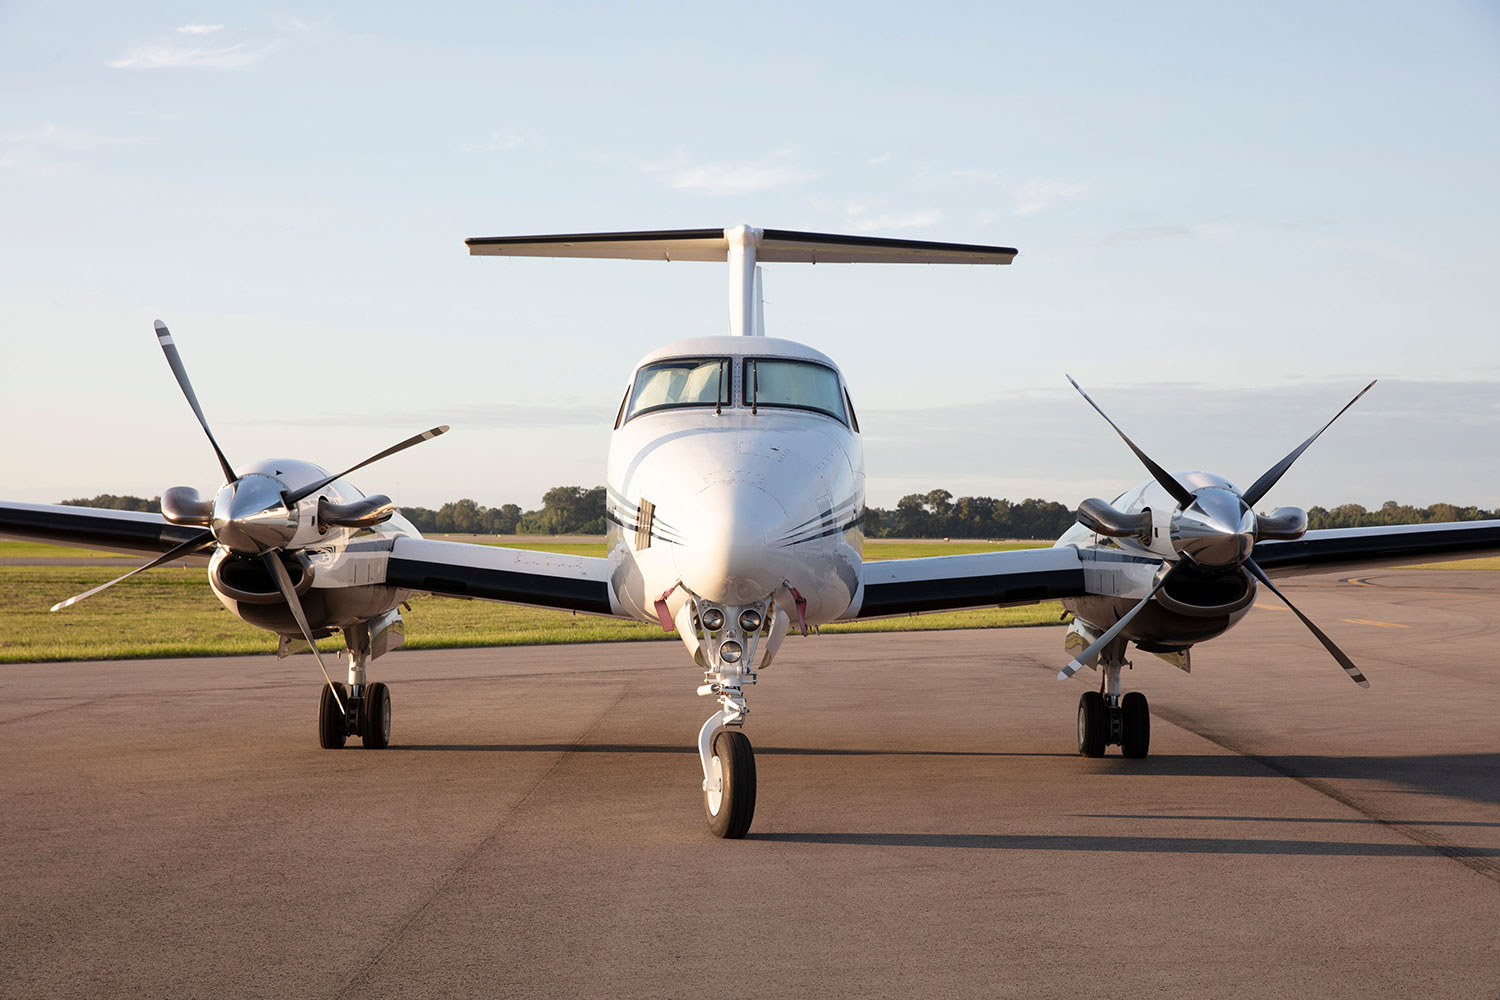 Popular destinations and sample fares from BTR Air Charter on the King Air BE-200